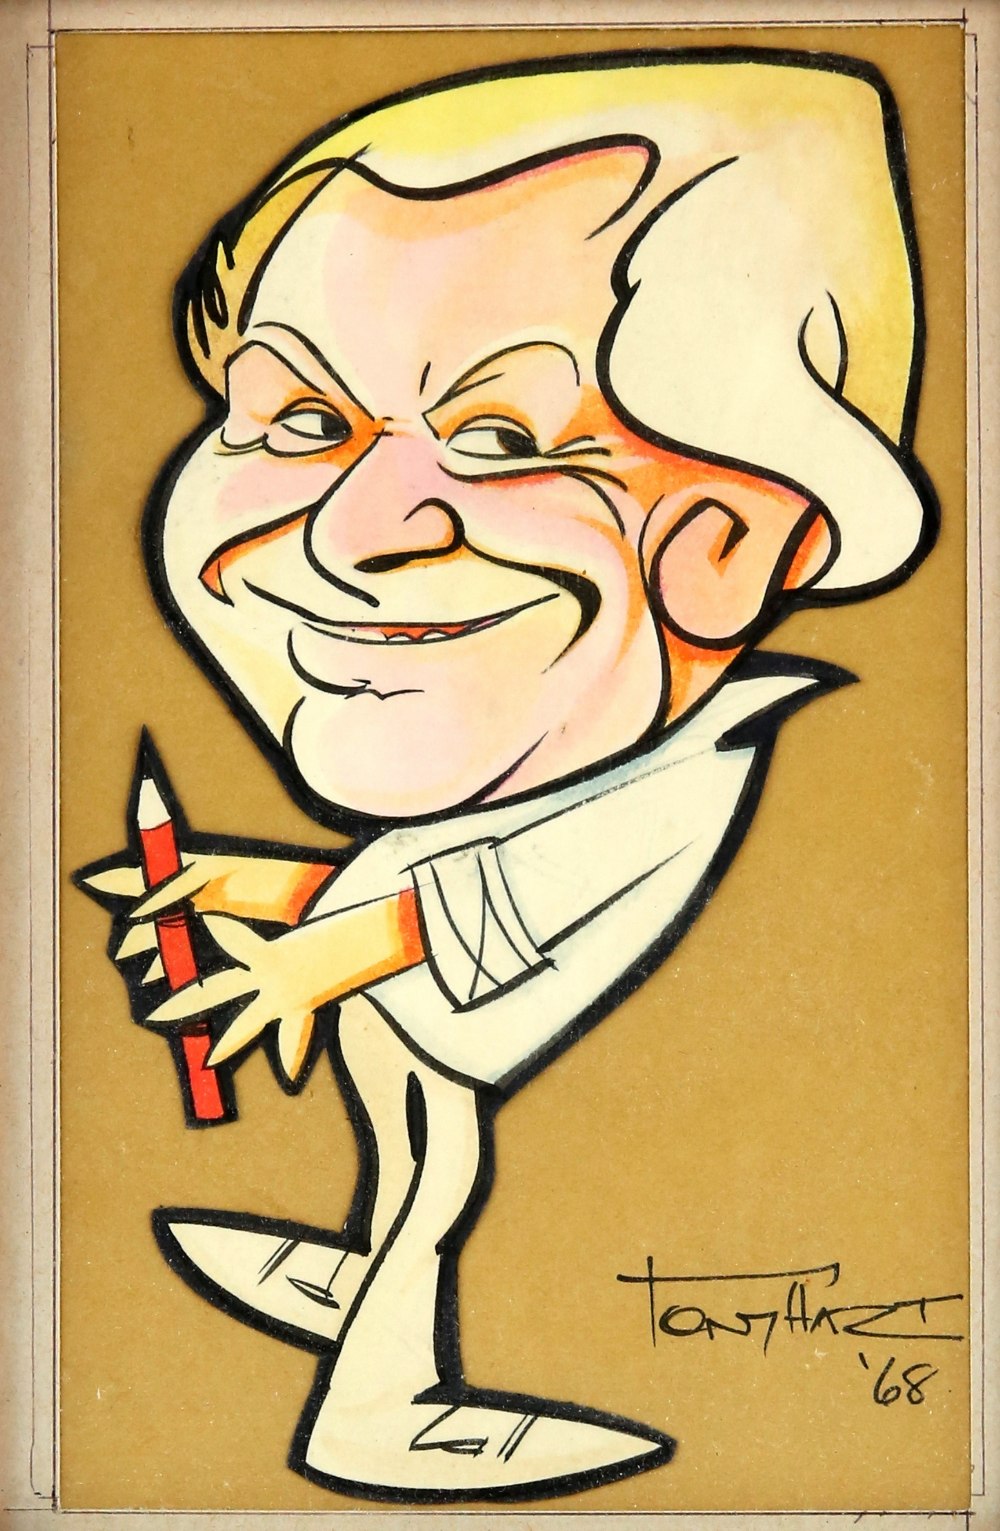 Tony Hart (British, 1925-2009). Caricature self portrait. 1968. Cut out mixed media / ink on